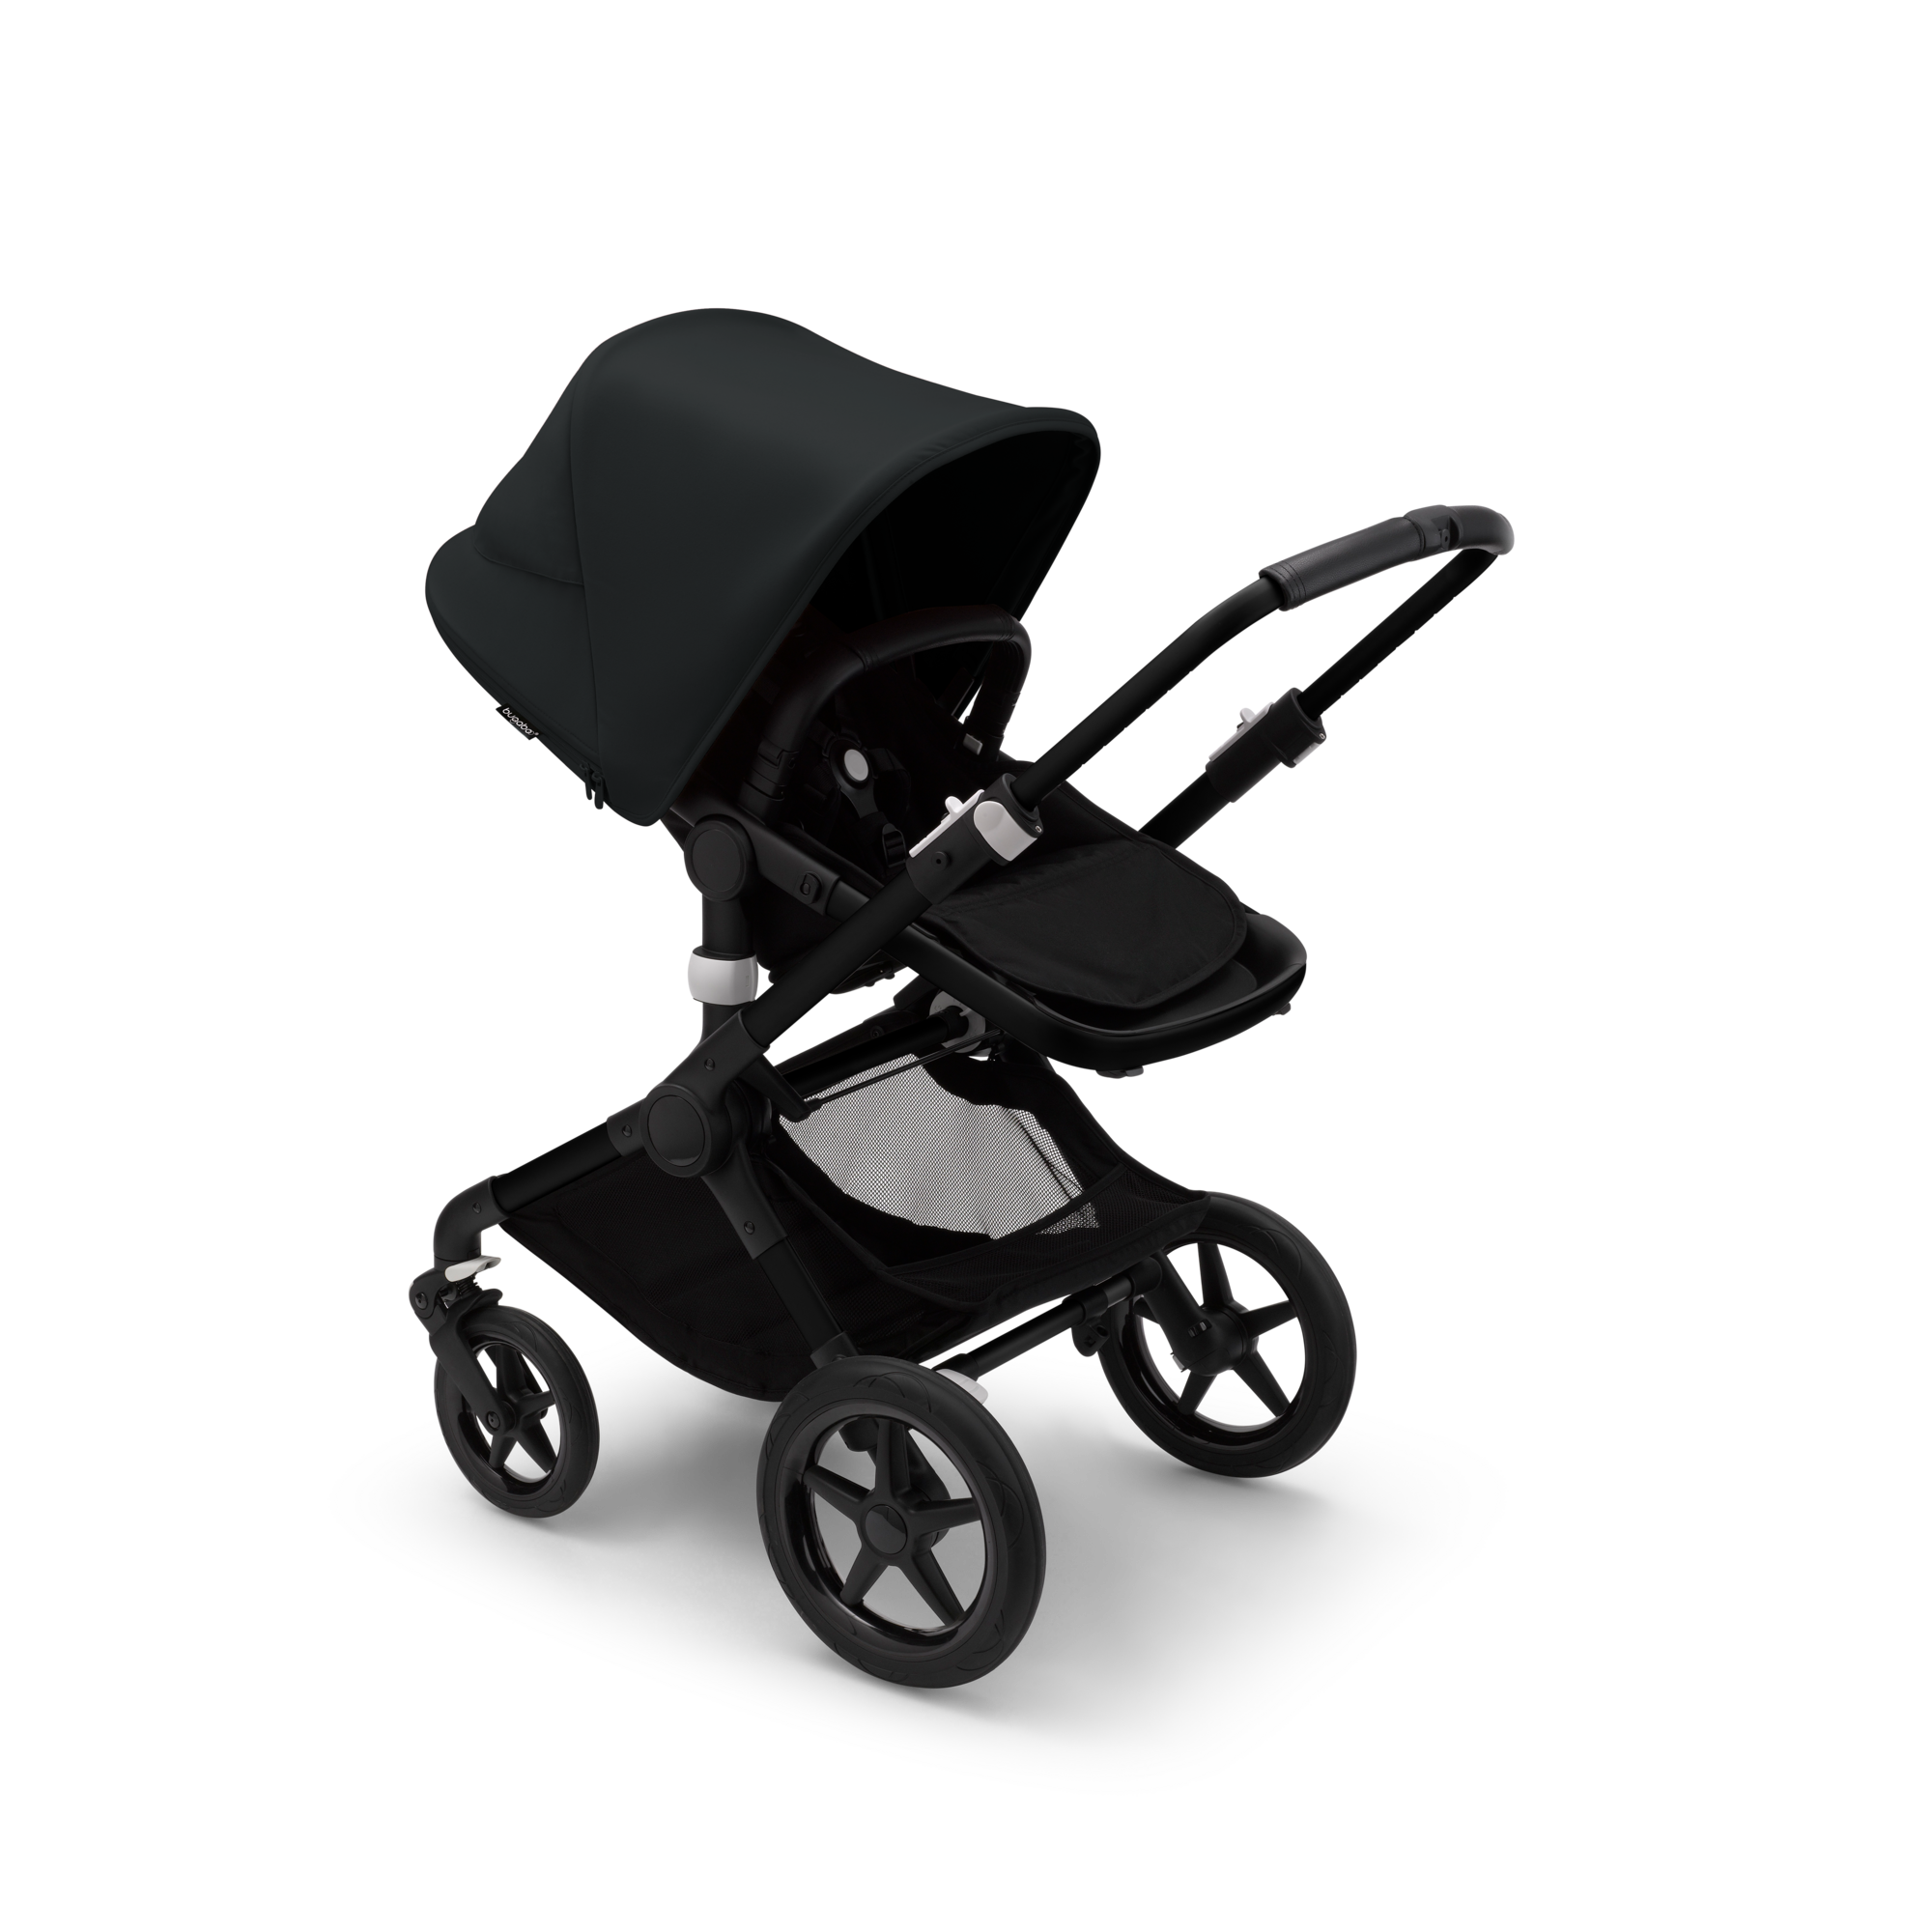 Review - 2021 Bugaboo Fox 3 with Stroller Seat 